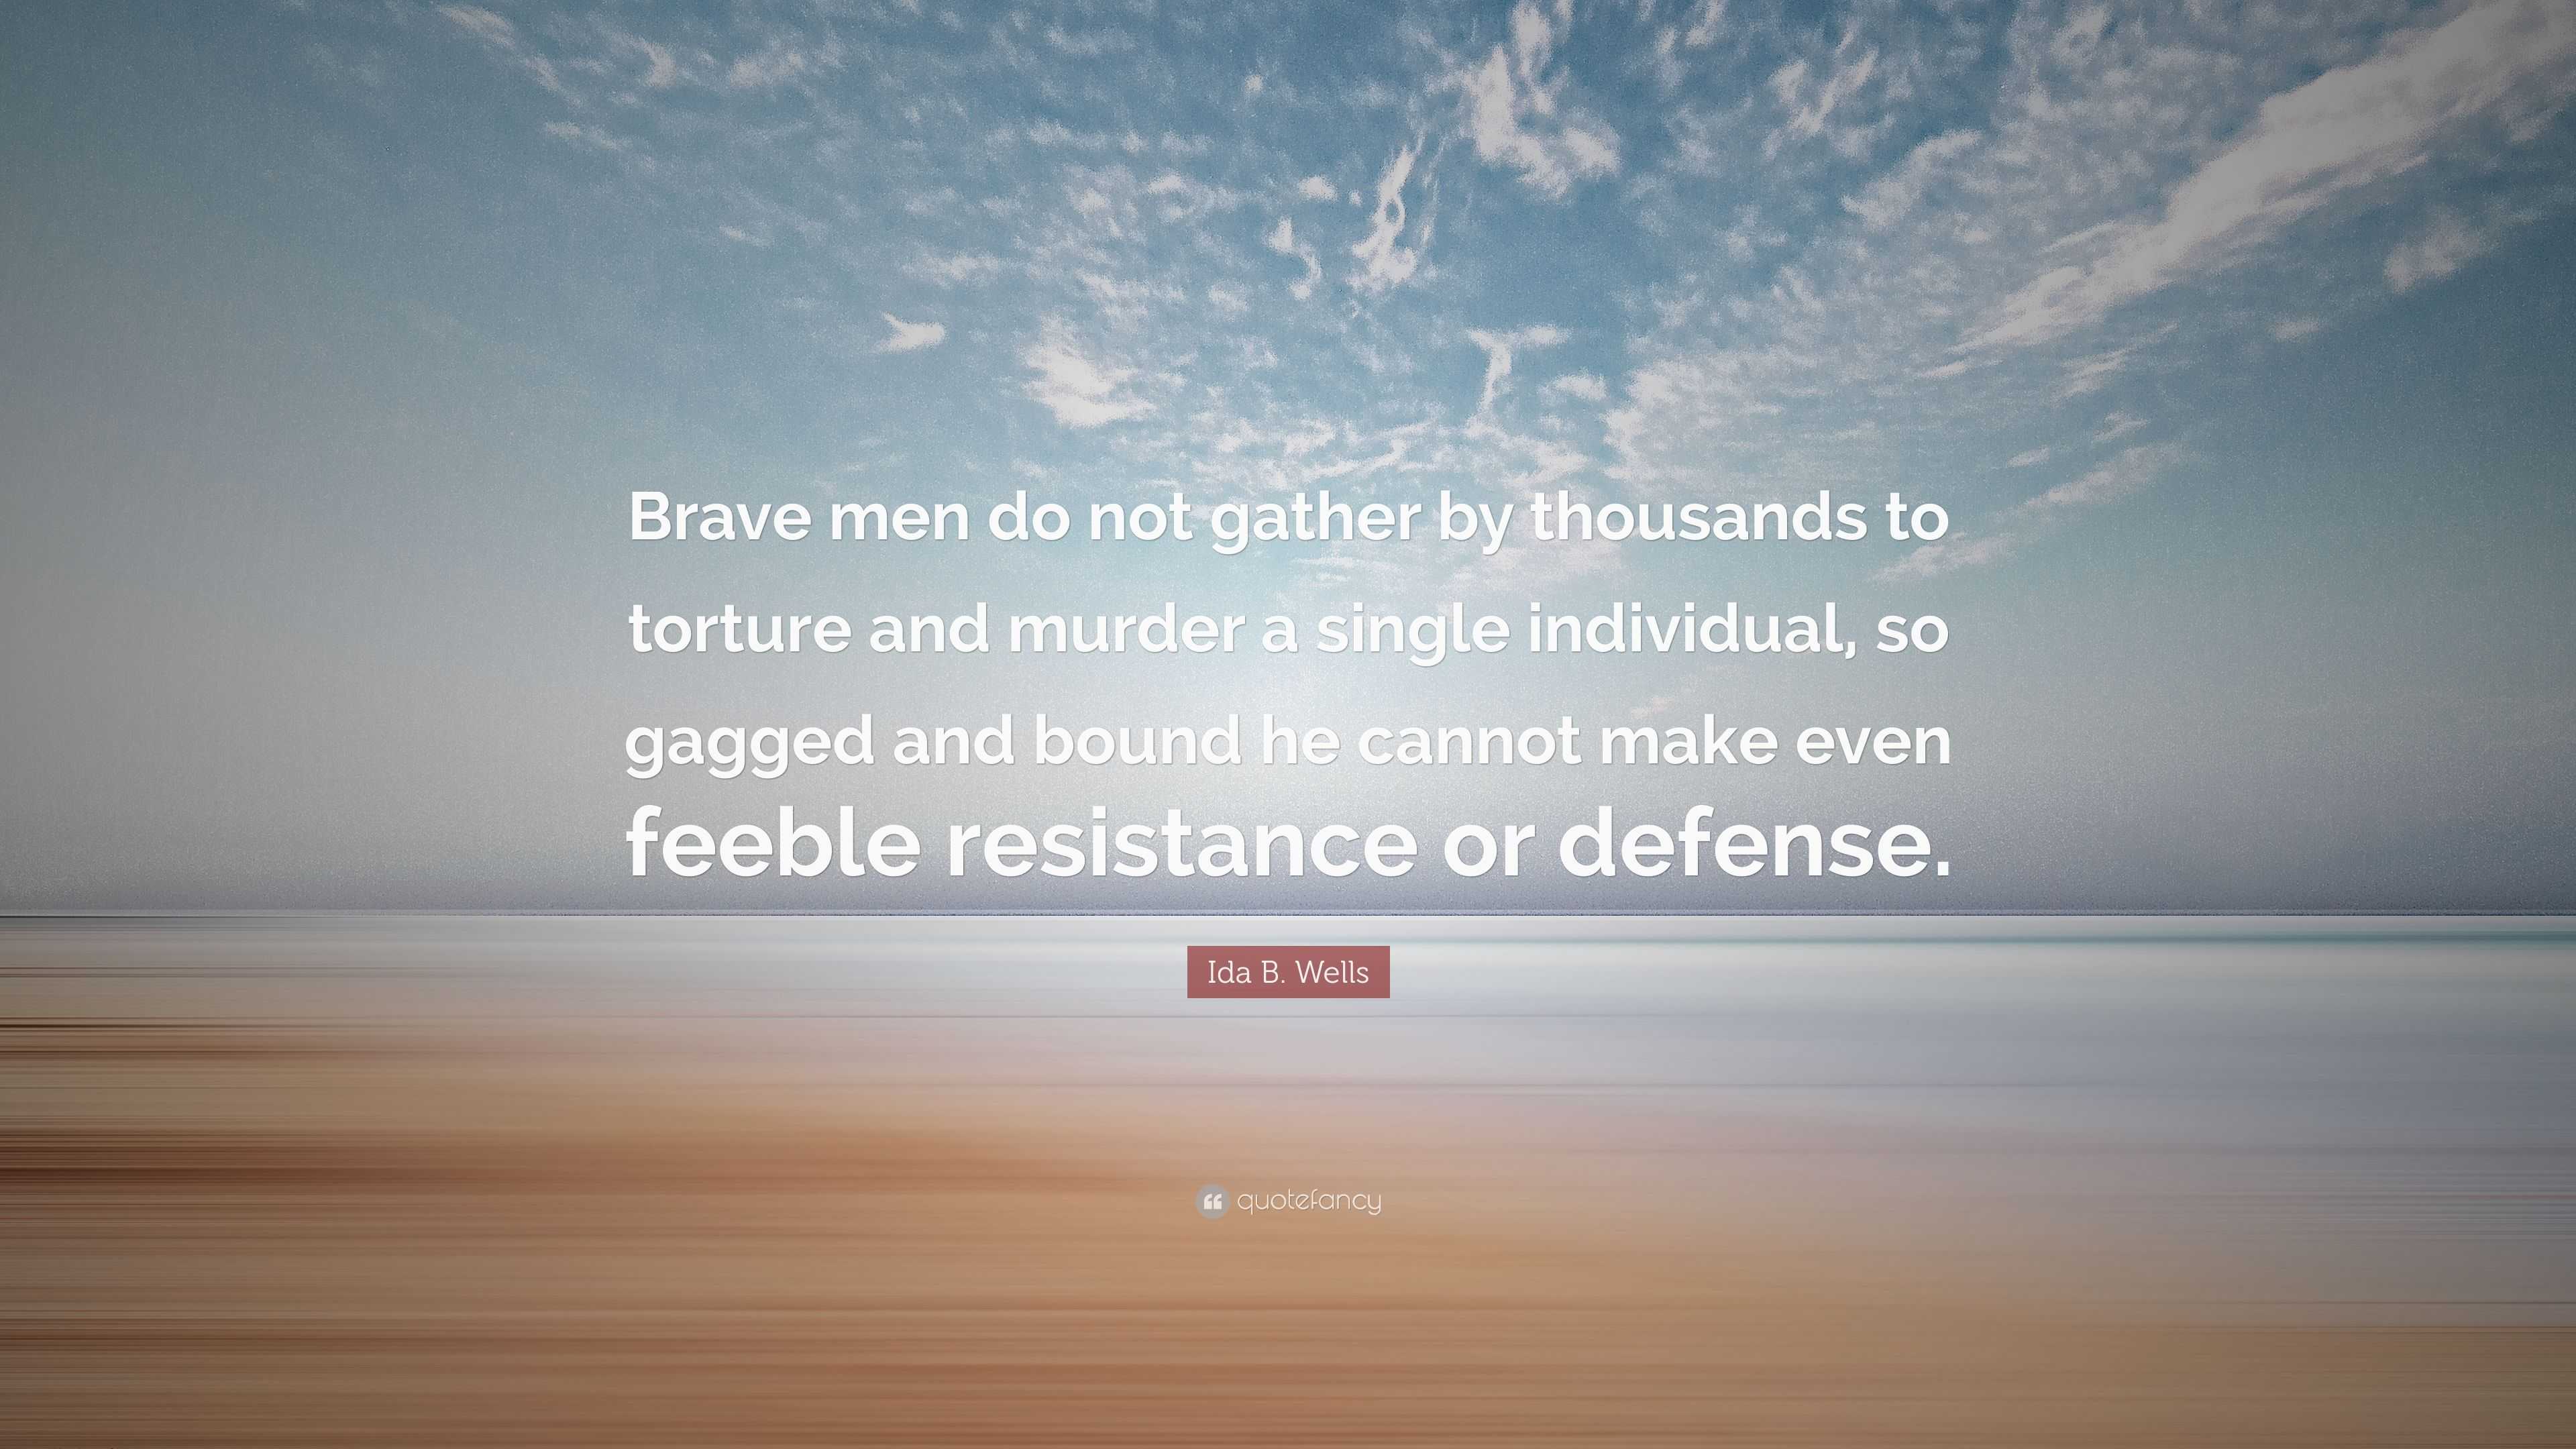 Ida B. Wells Quote: “Brave men do not gather by thousands to torture